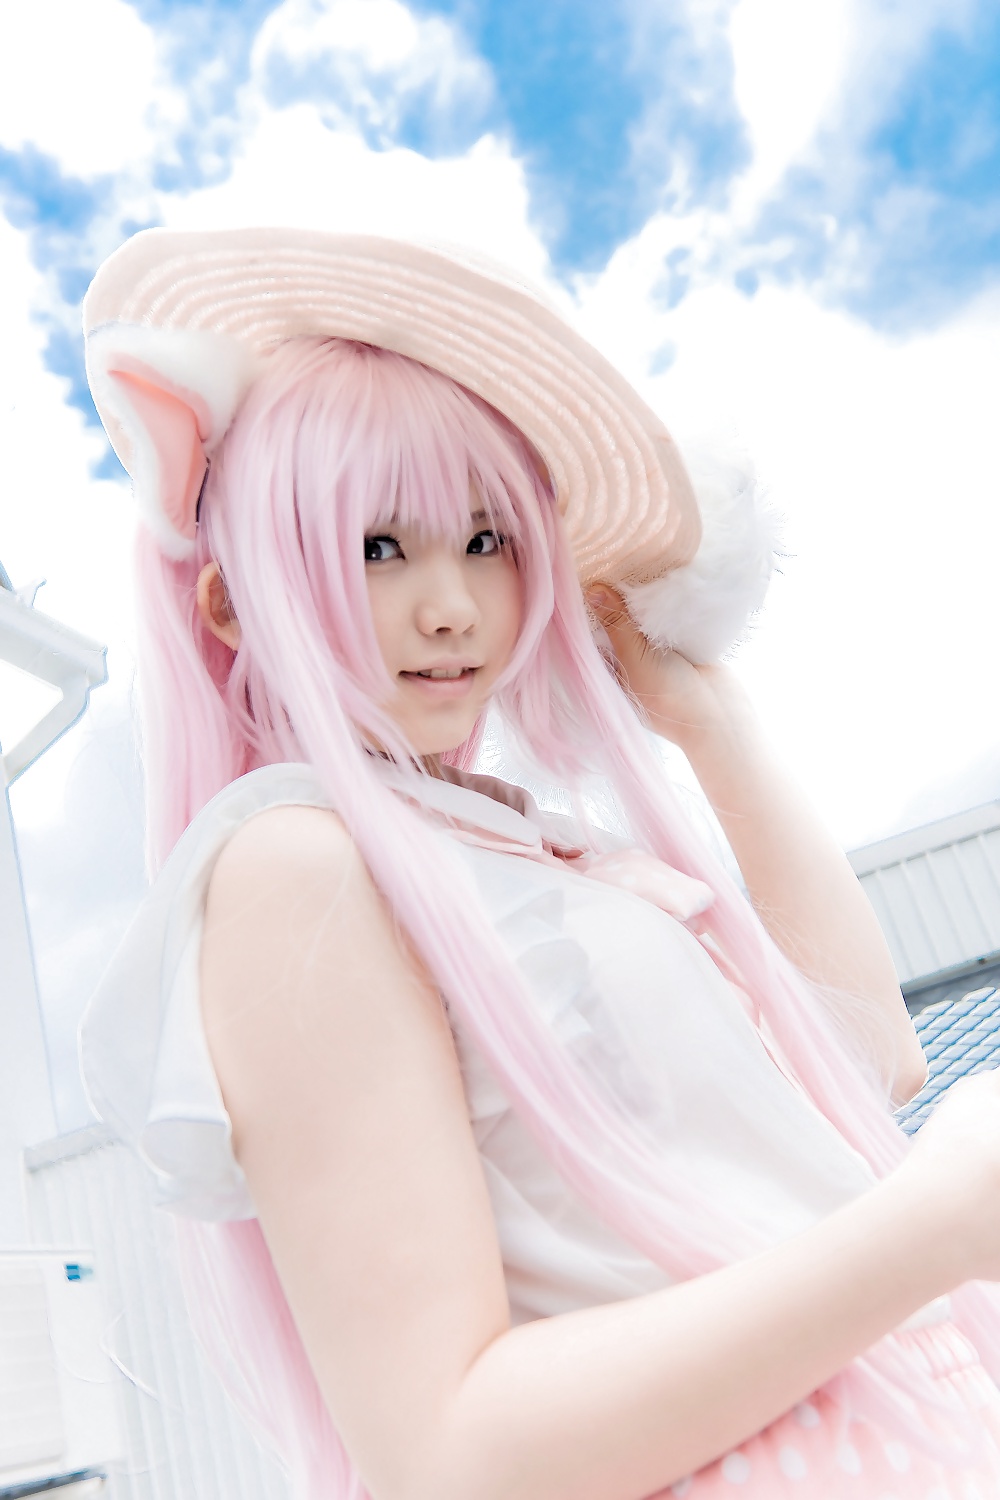 Asiatica cosplay in bianco
 #26559071